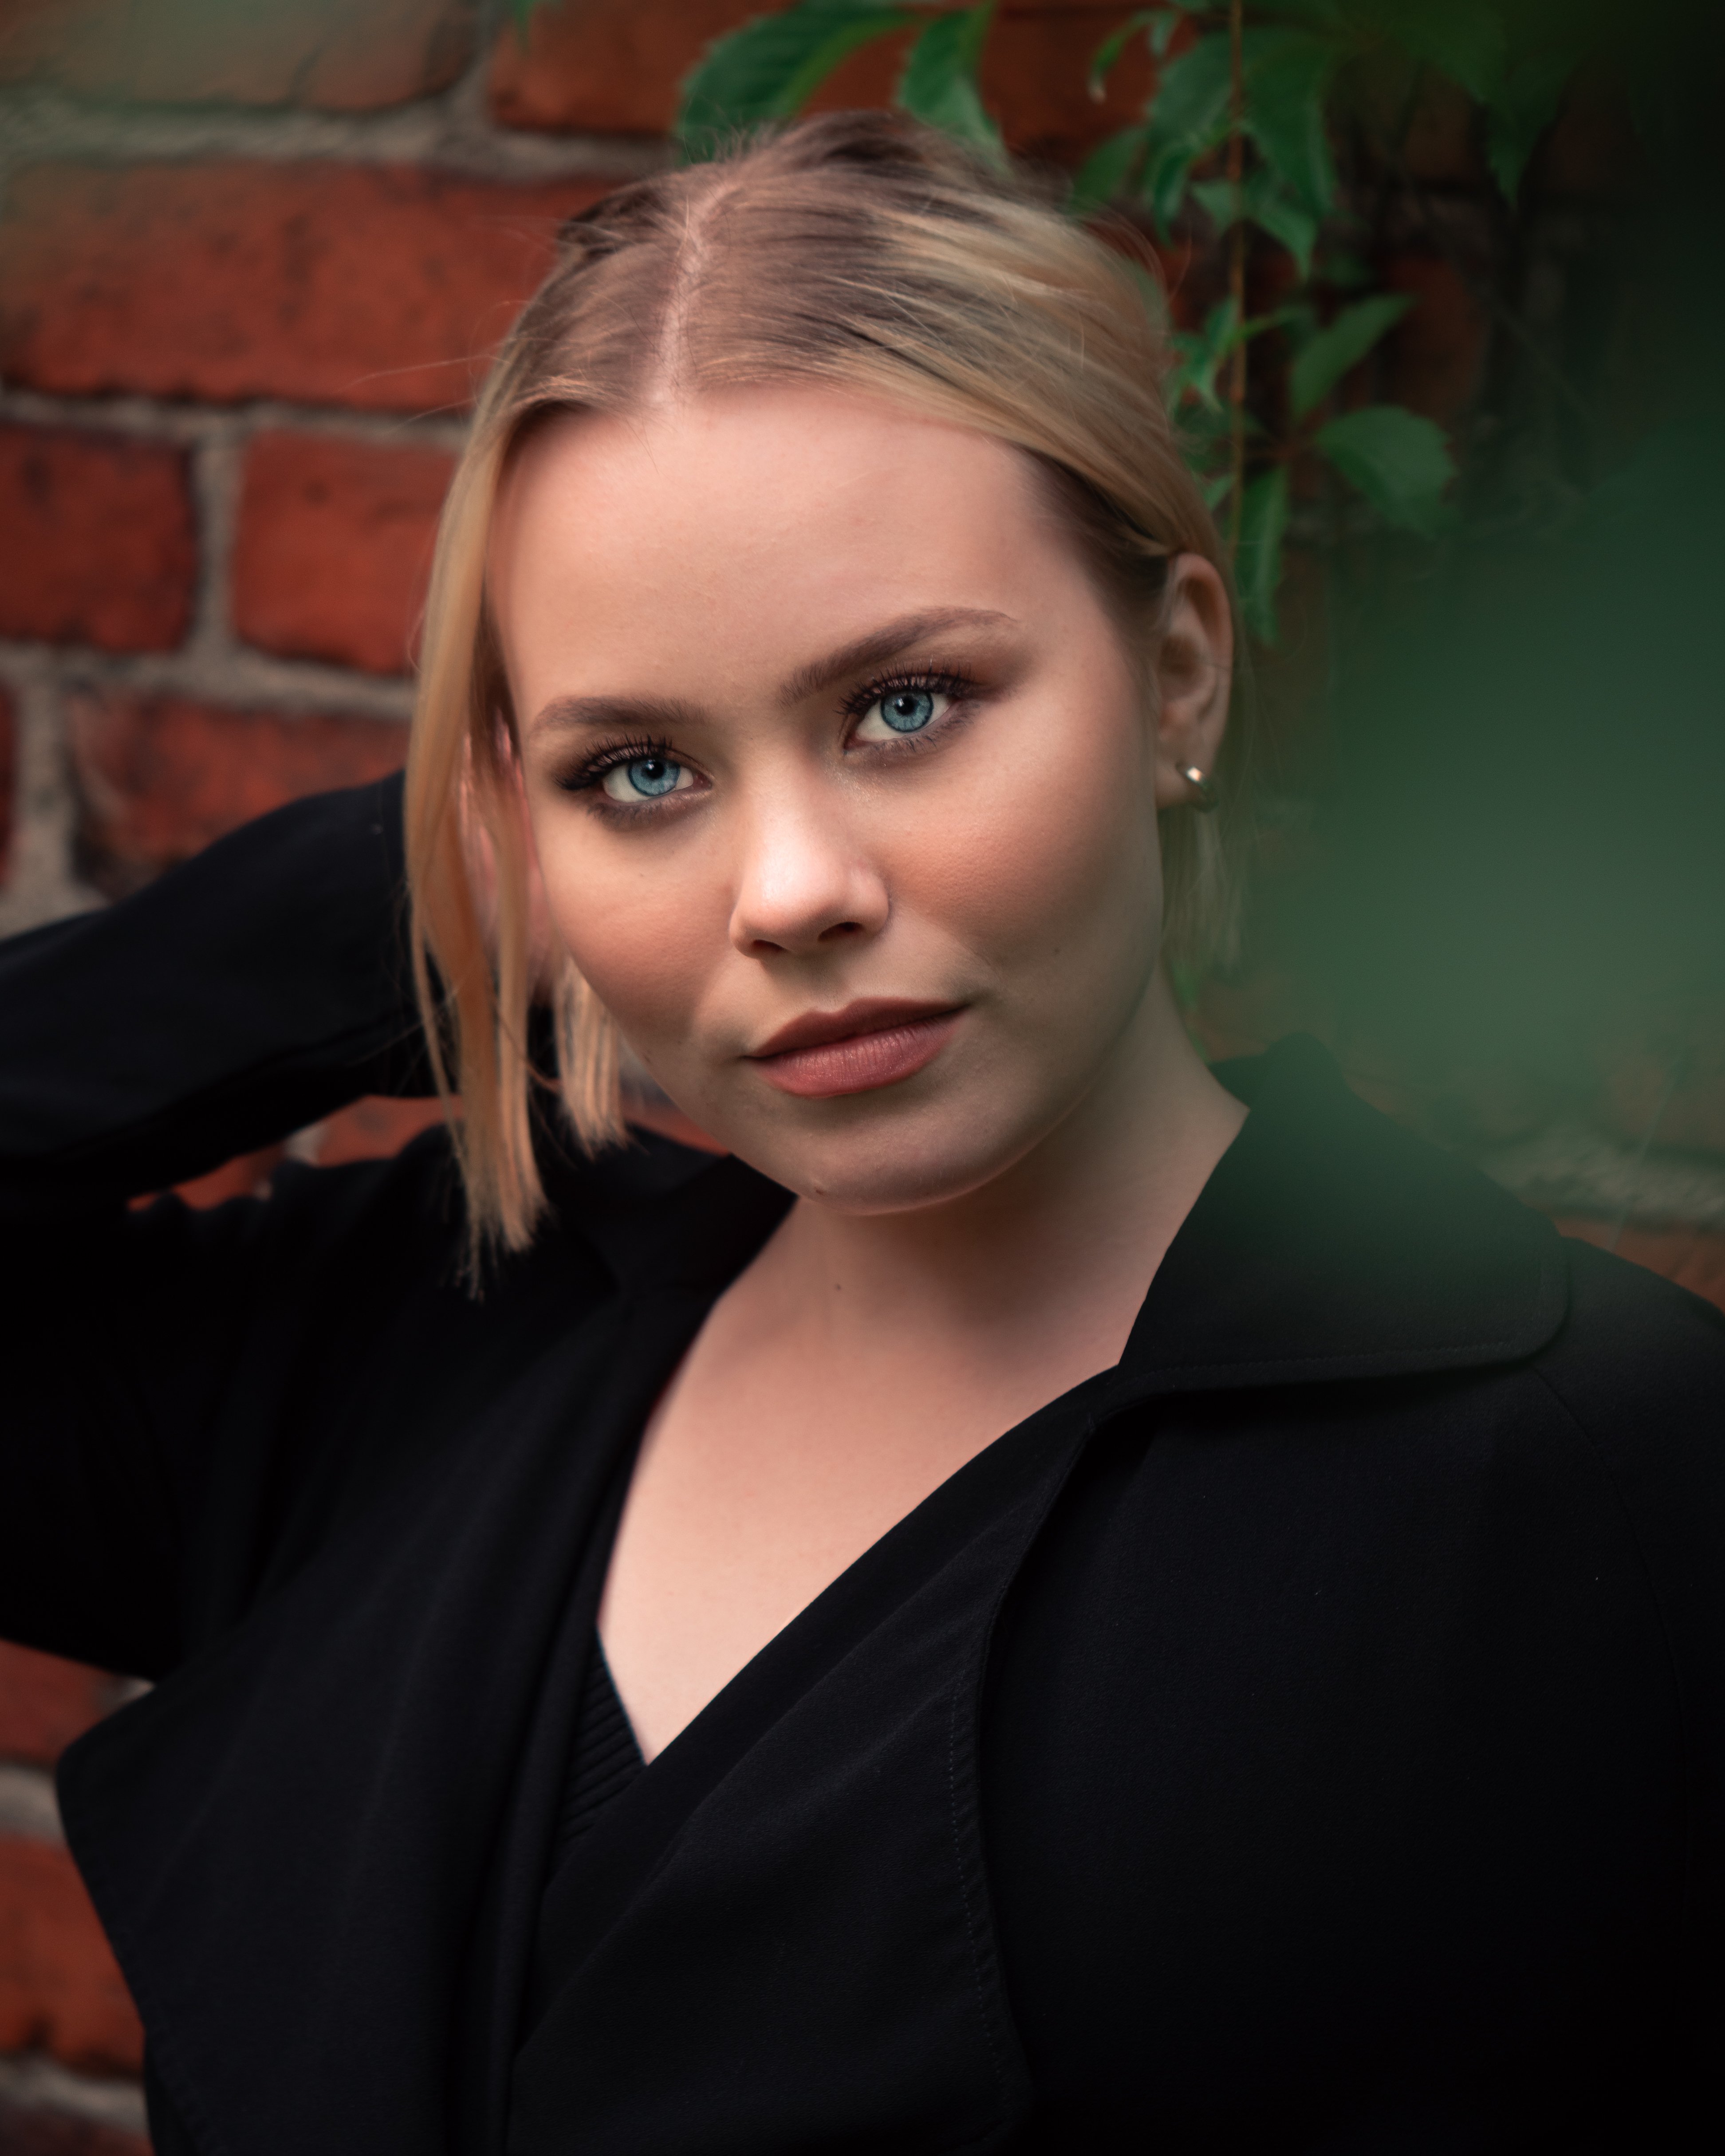 Blonde woman with blue eyes is wearing a black coat and a black blouse. She is standing in front of a brick wall. She has a neutral expression.